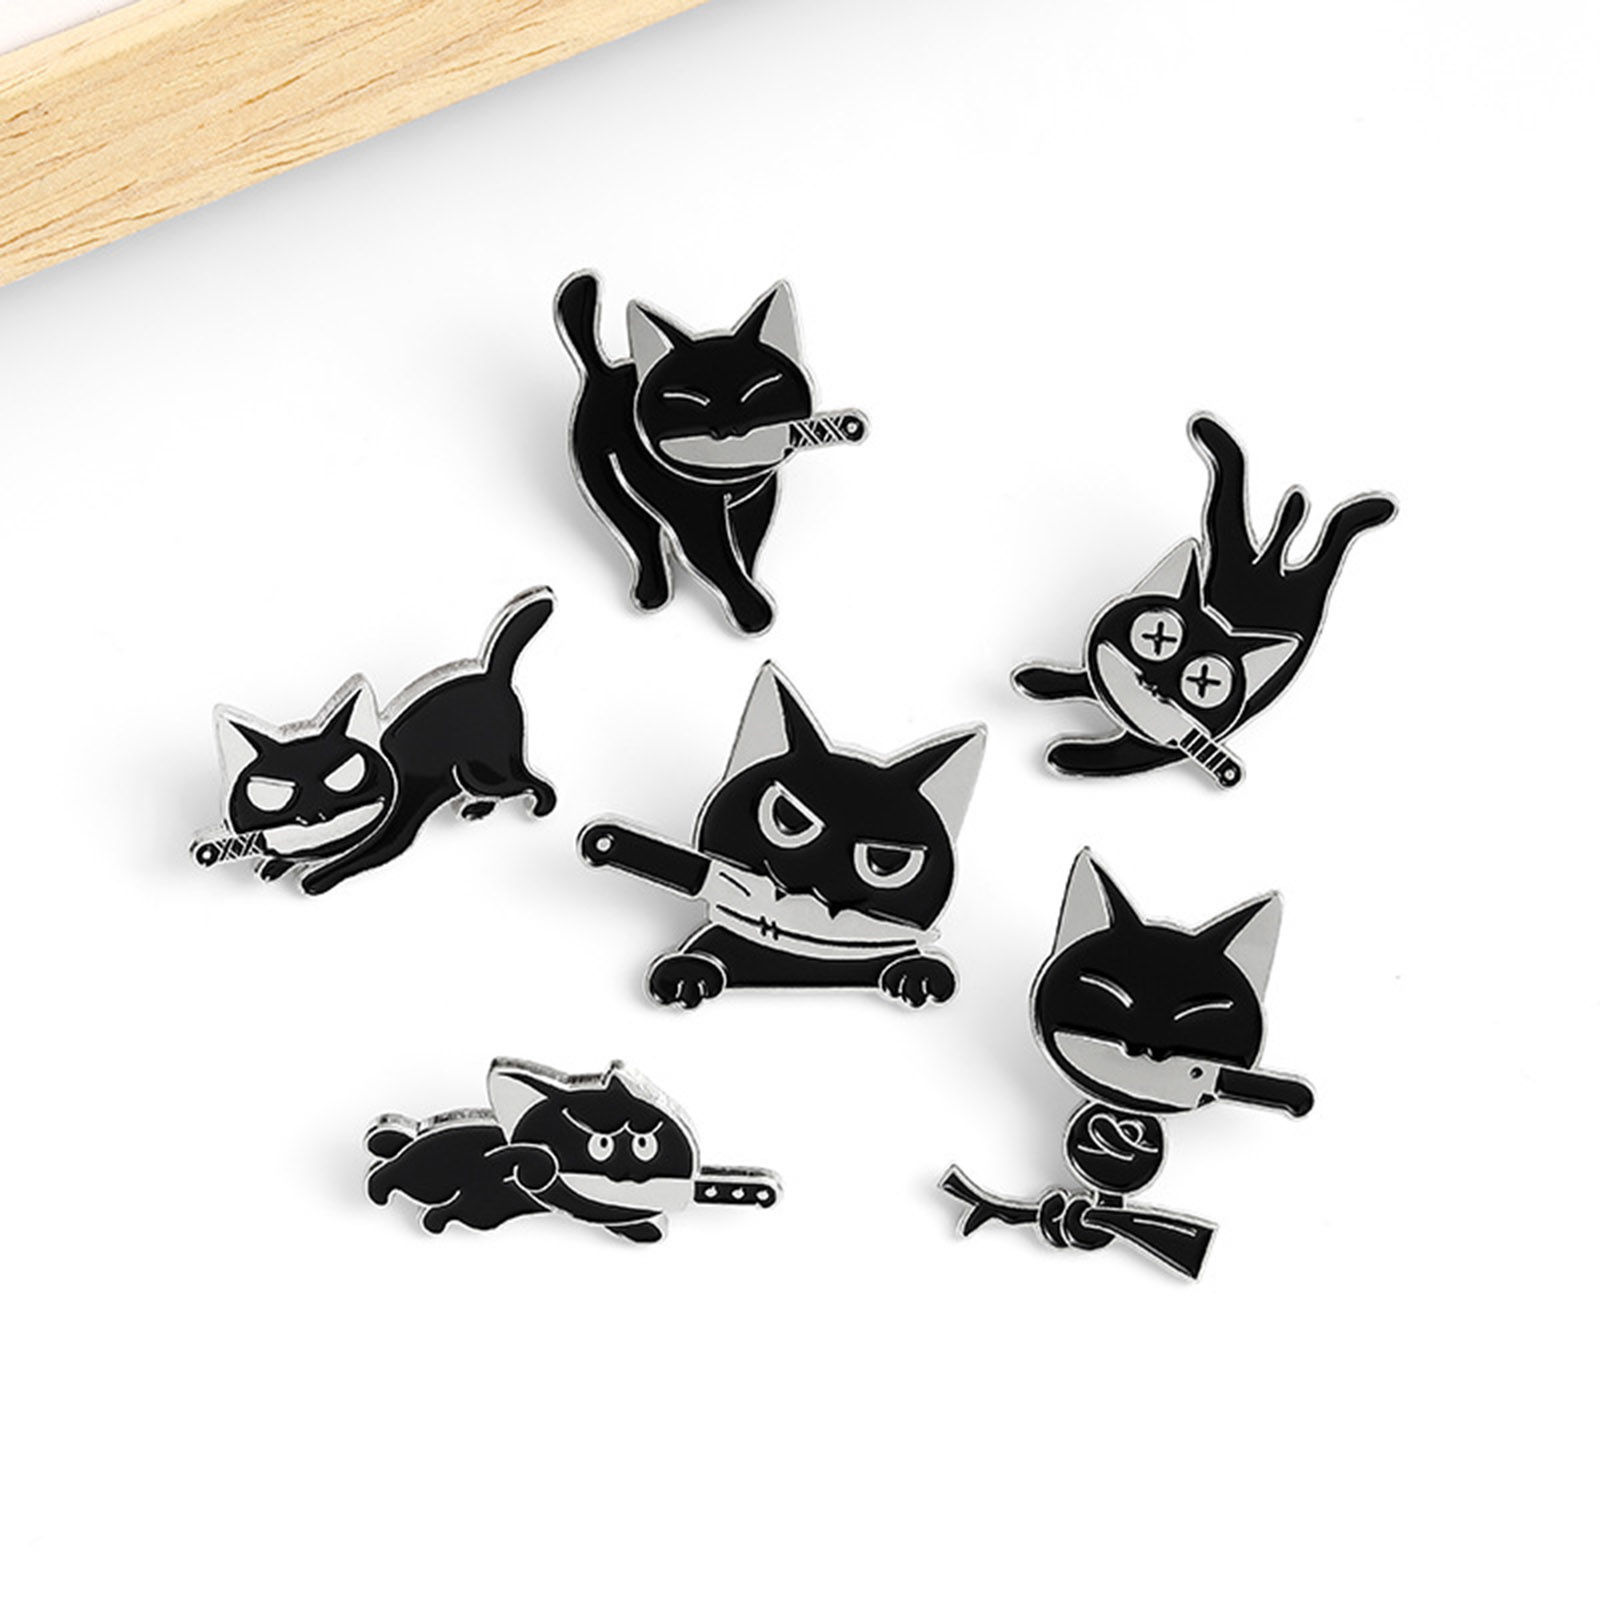 Picture of Cute Pin Brooches Knife Cat Black Enamel